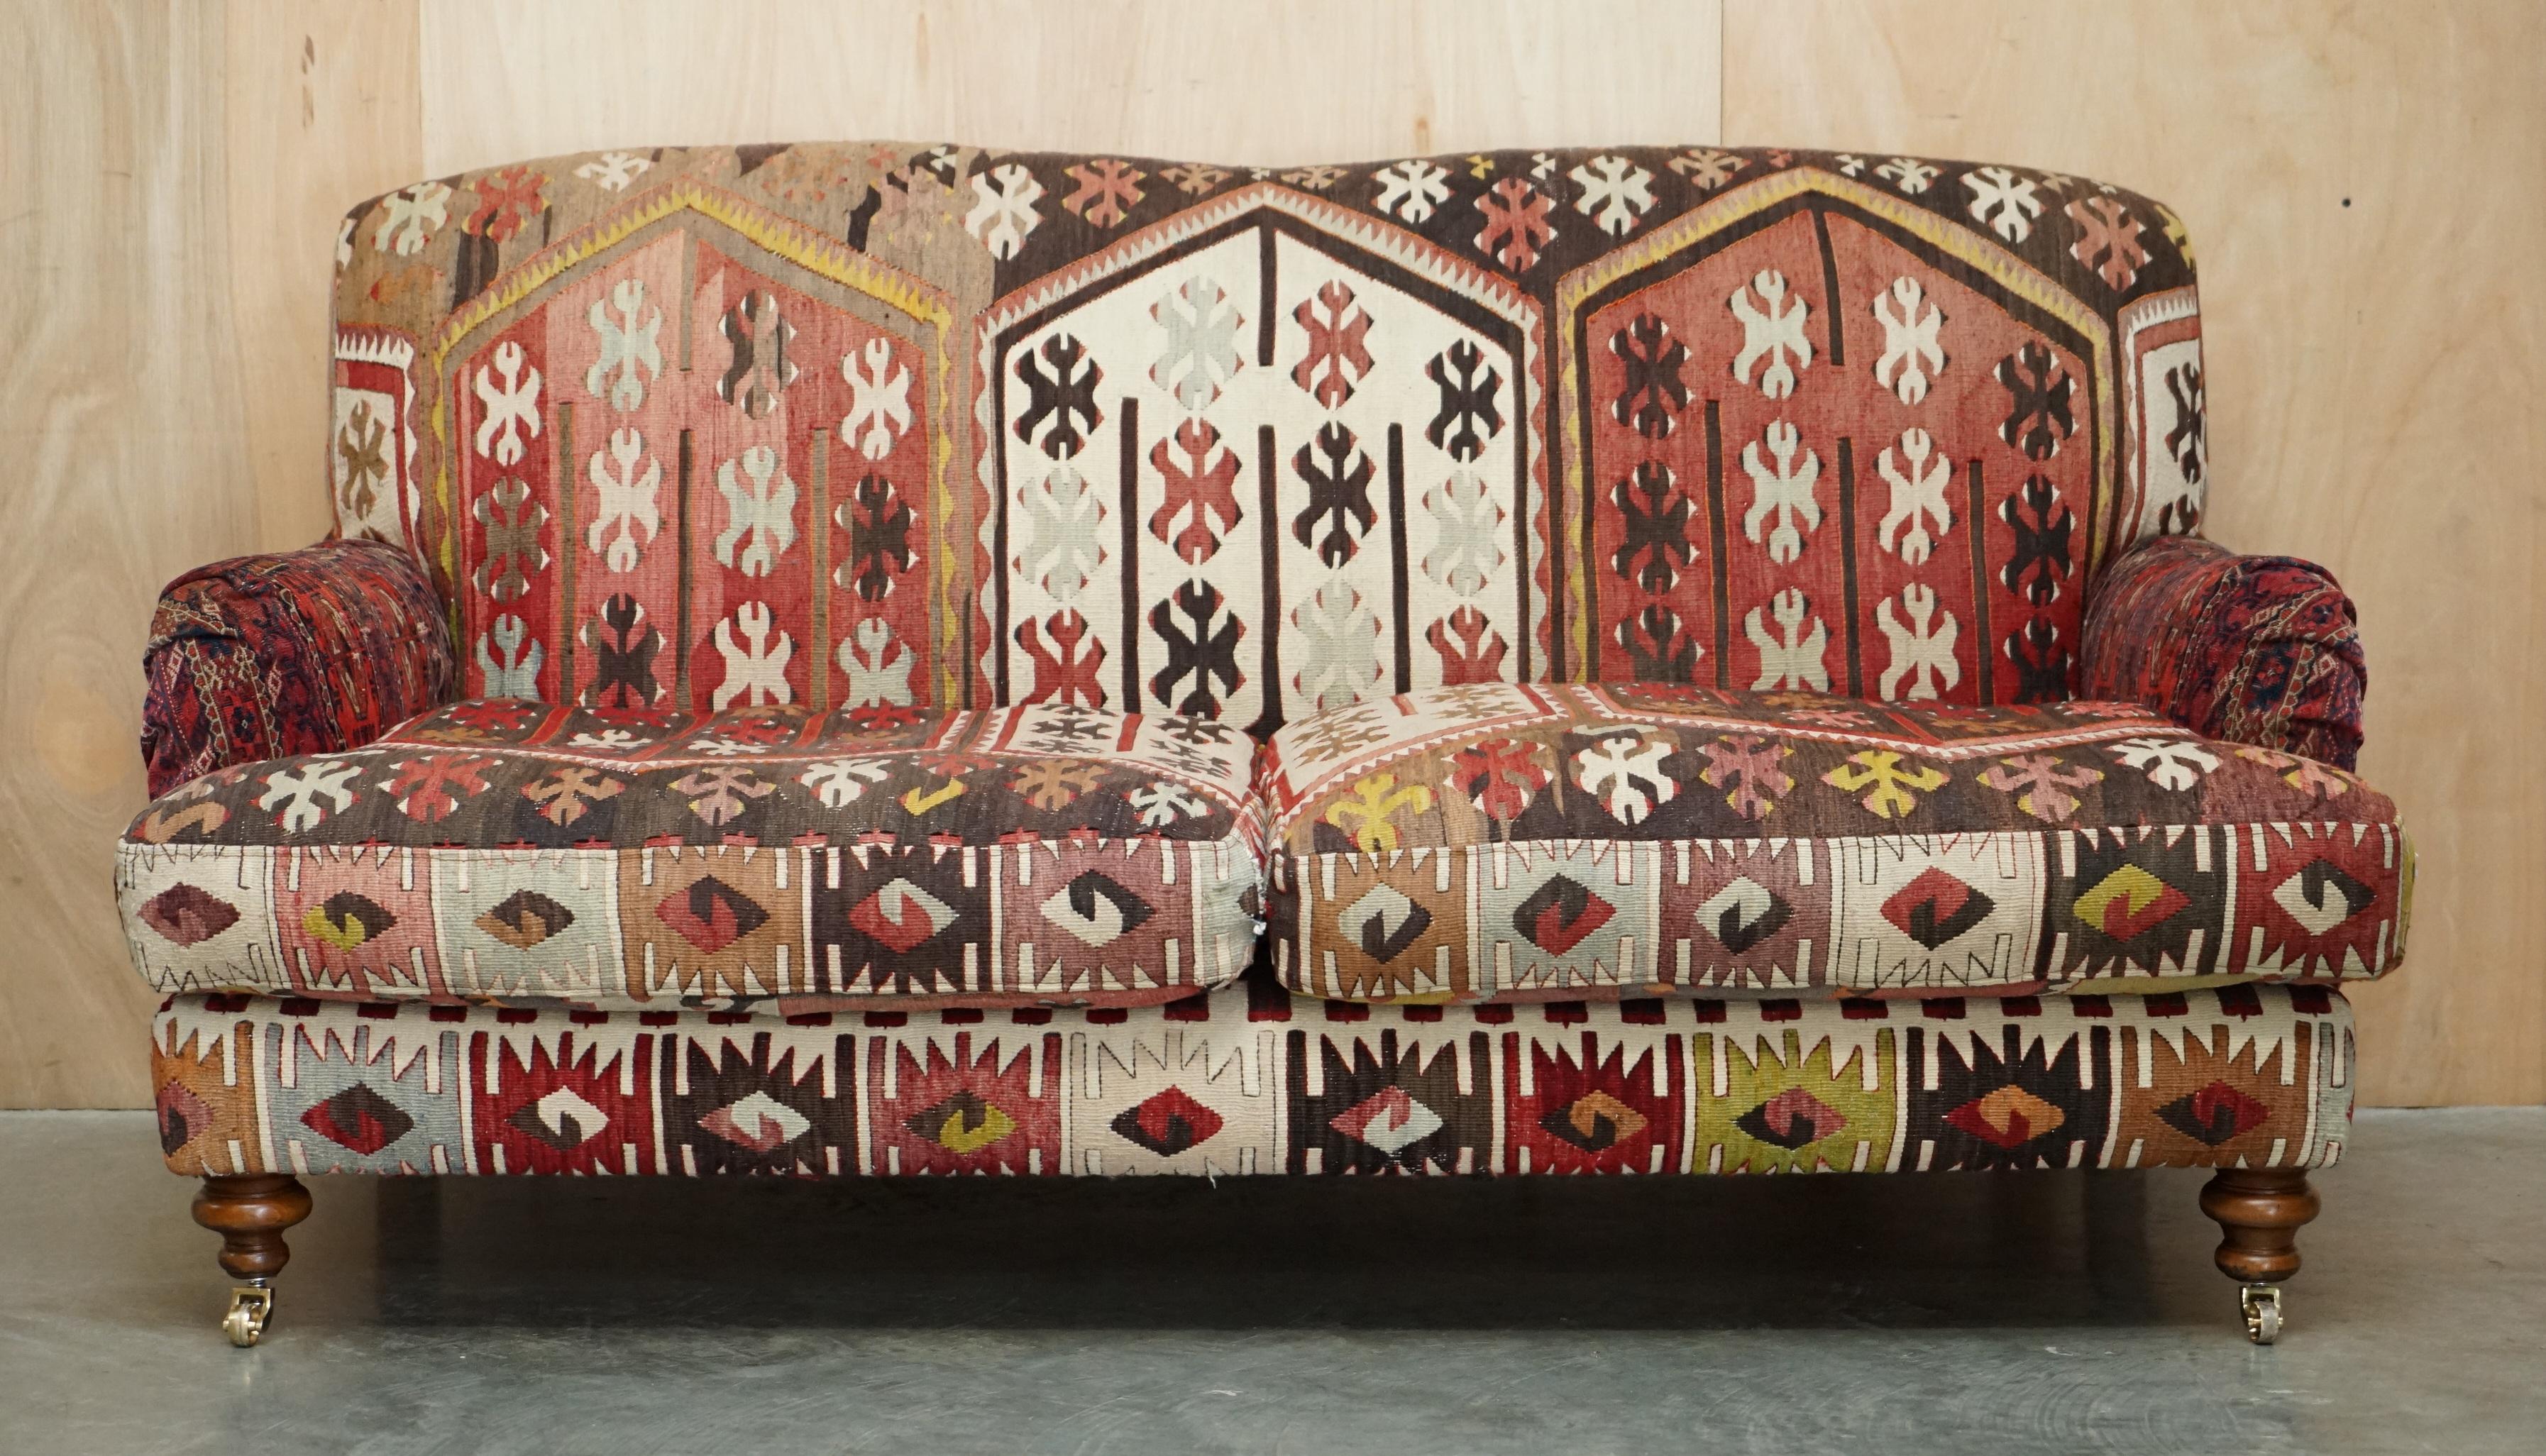 Royal House Antiques

Royal House Antiques is delighted to offer for sale this sublime George Smith / Howard & Son's style, signature scroll arm two-seat sofa upholstered with Aztec Kilims

Please note the delivery fee listed is just a guide, it